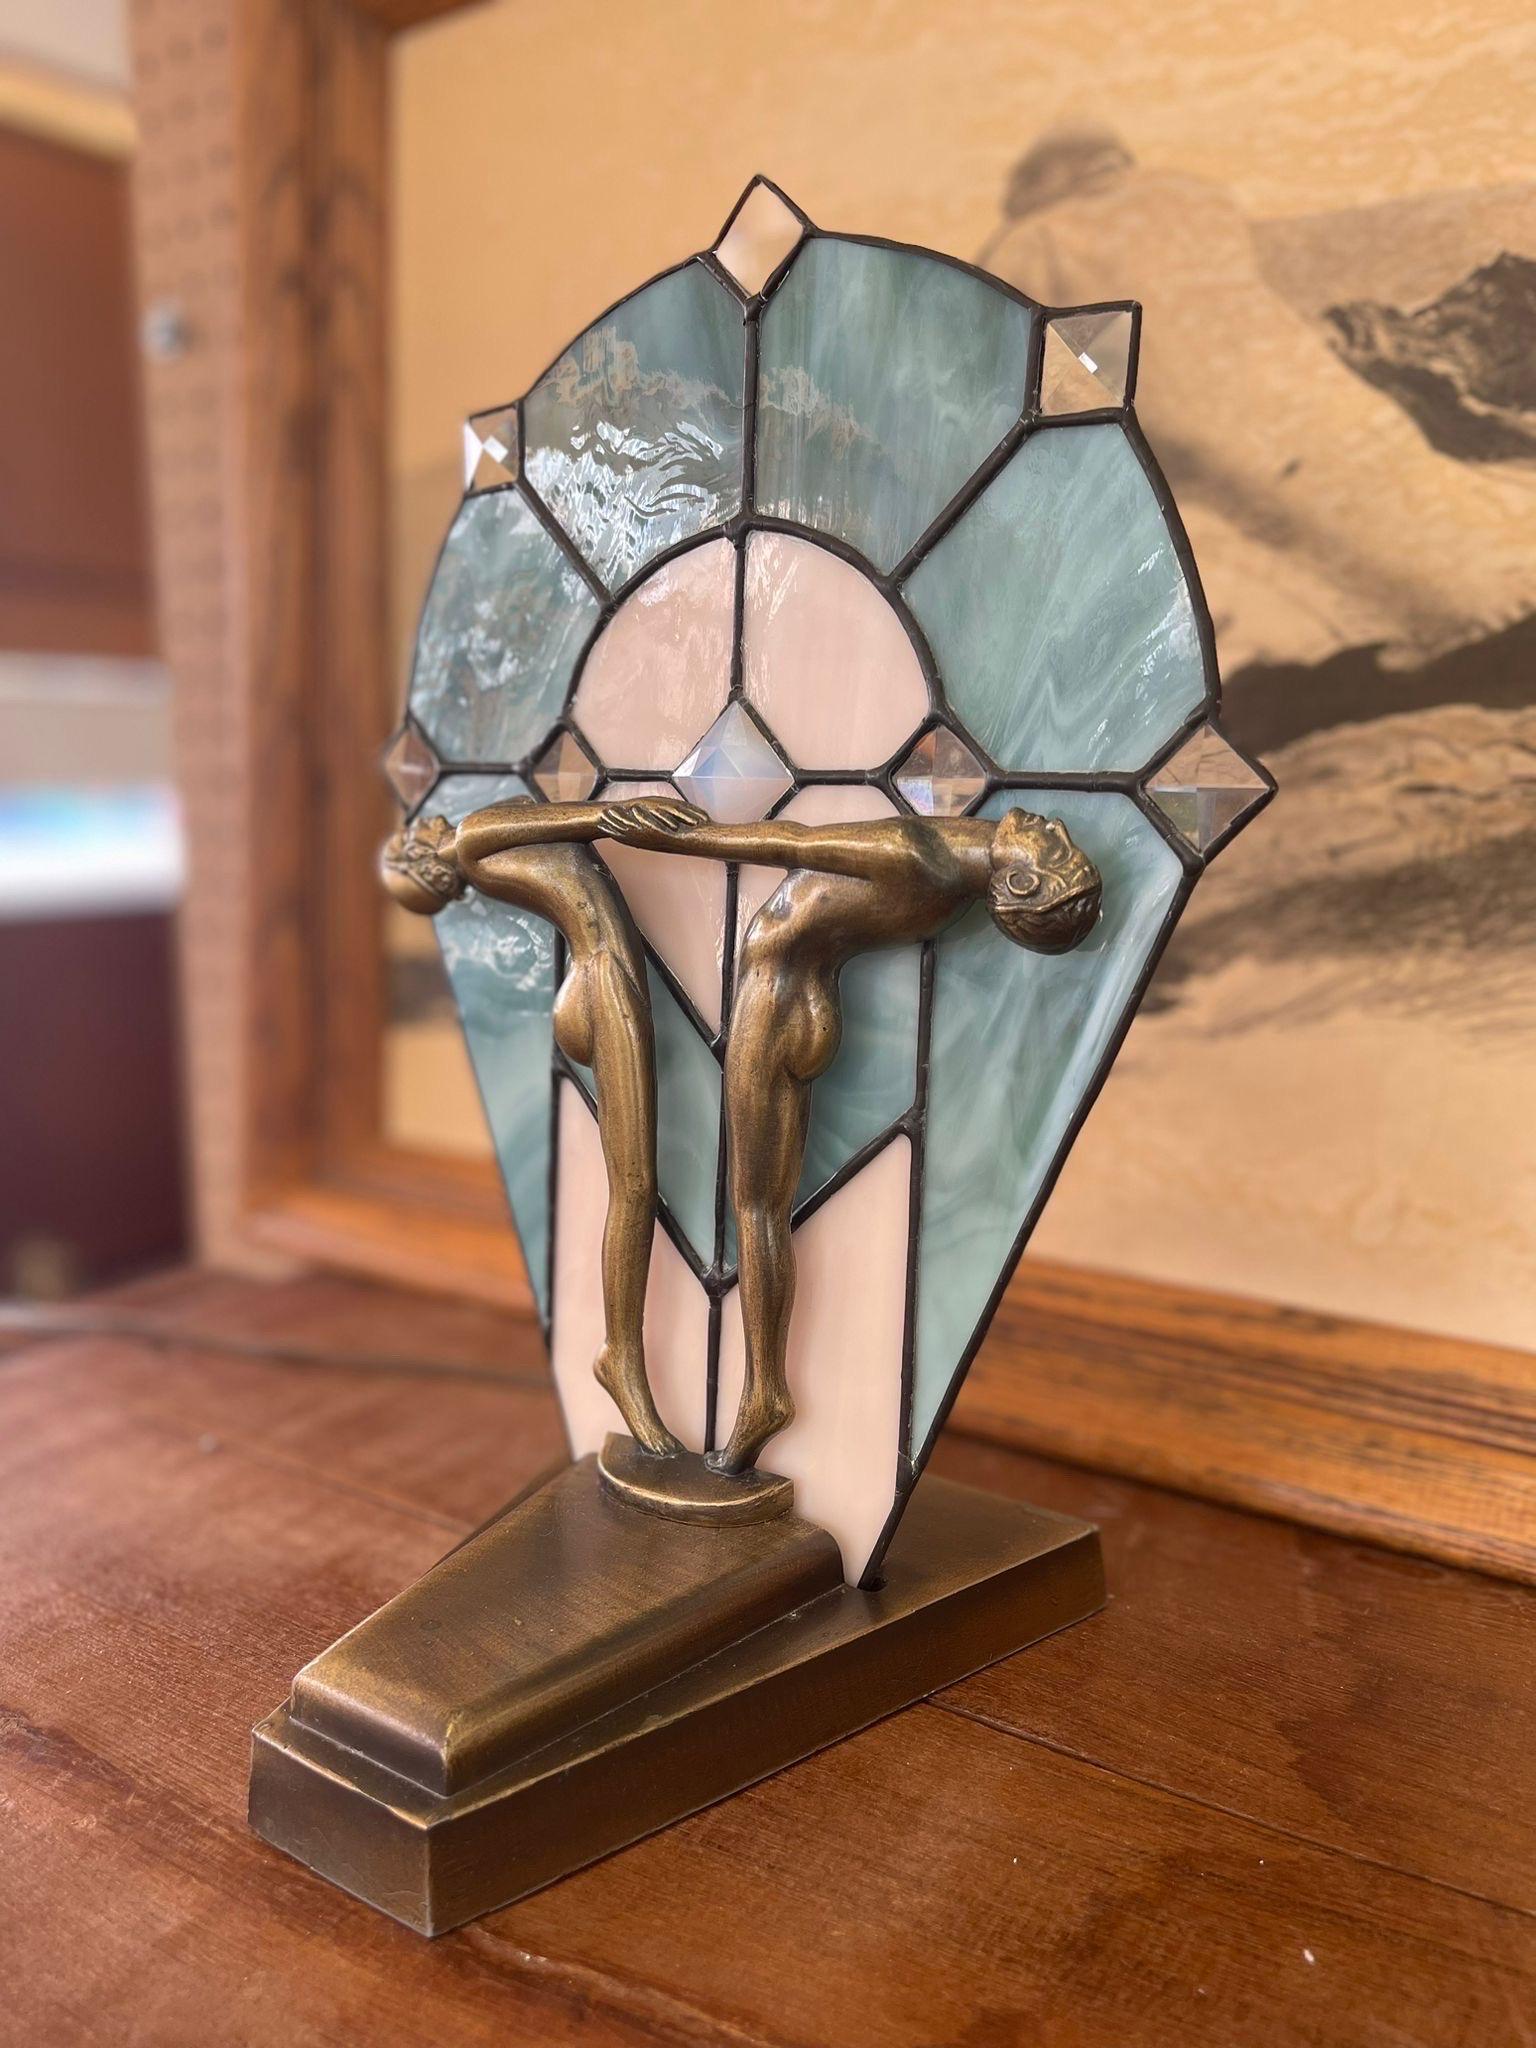 Vintage Art Deco Stained Glass Nude Figurine Blue Lamp possibly Bronze. ( Non Operational )

Dimensions. 10 W ; 6 1/2 D ; 14 H